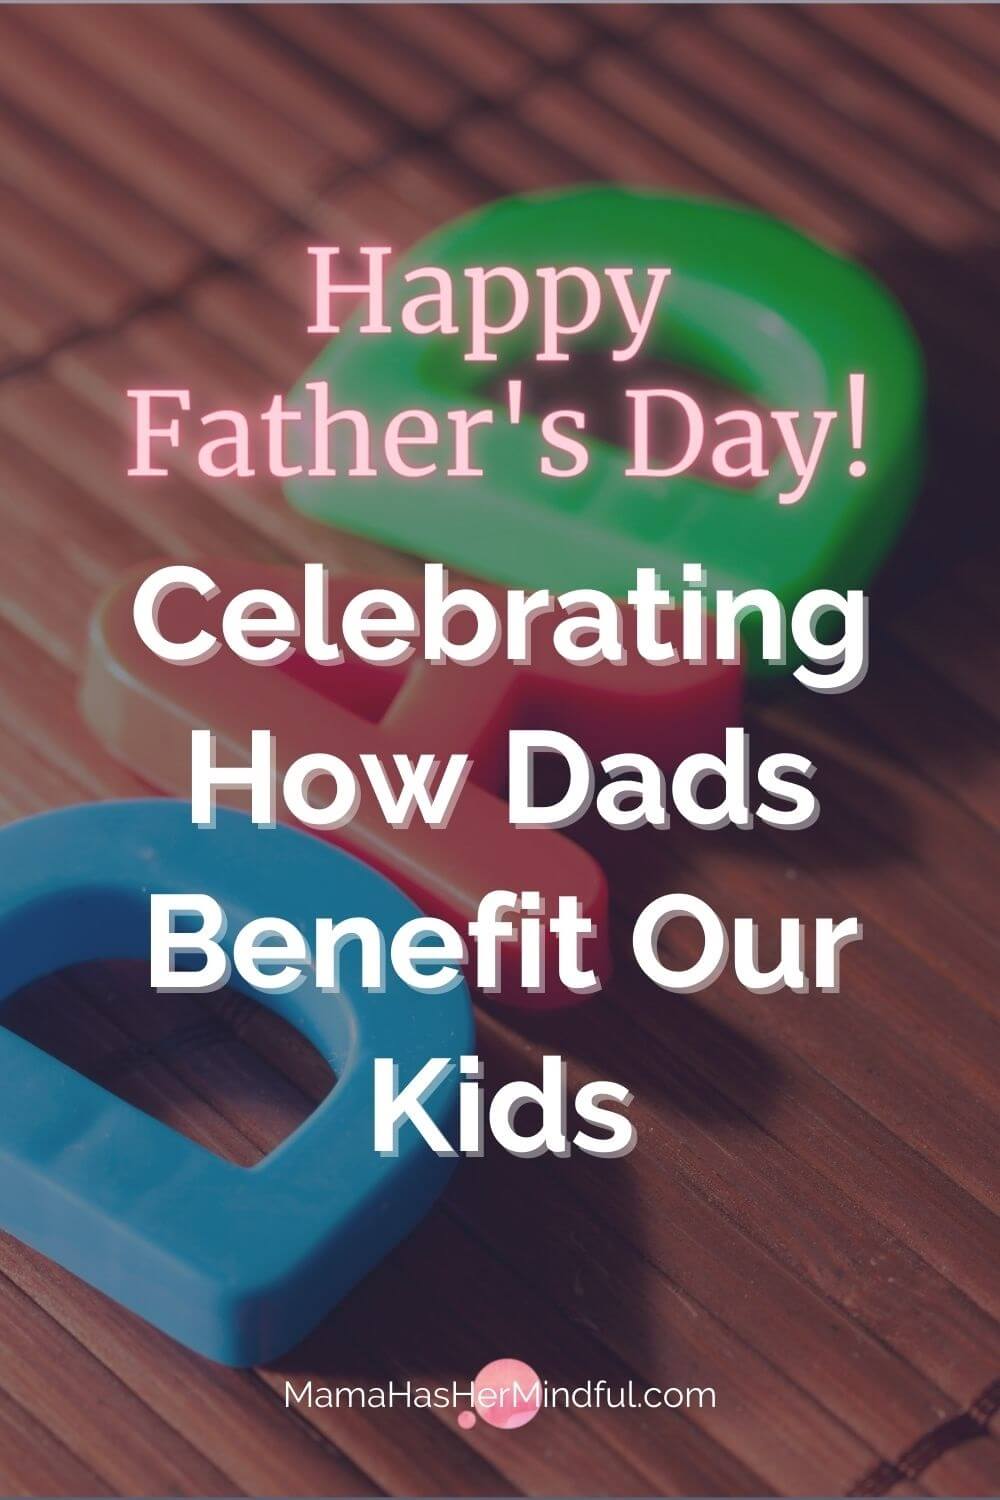 Happy Father’s Day: Celebrating How Dads Benefit Our Kids